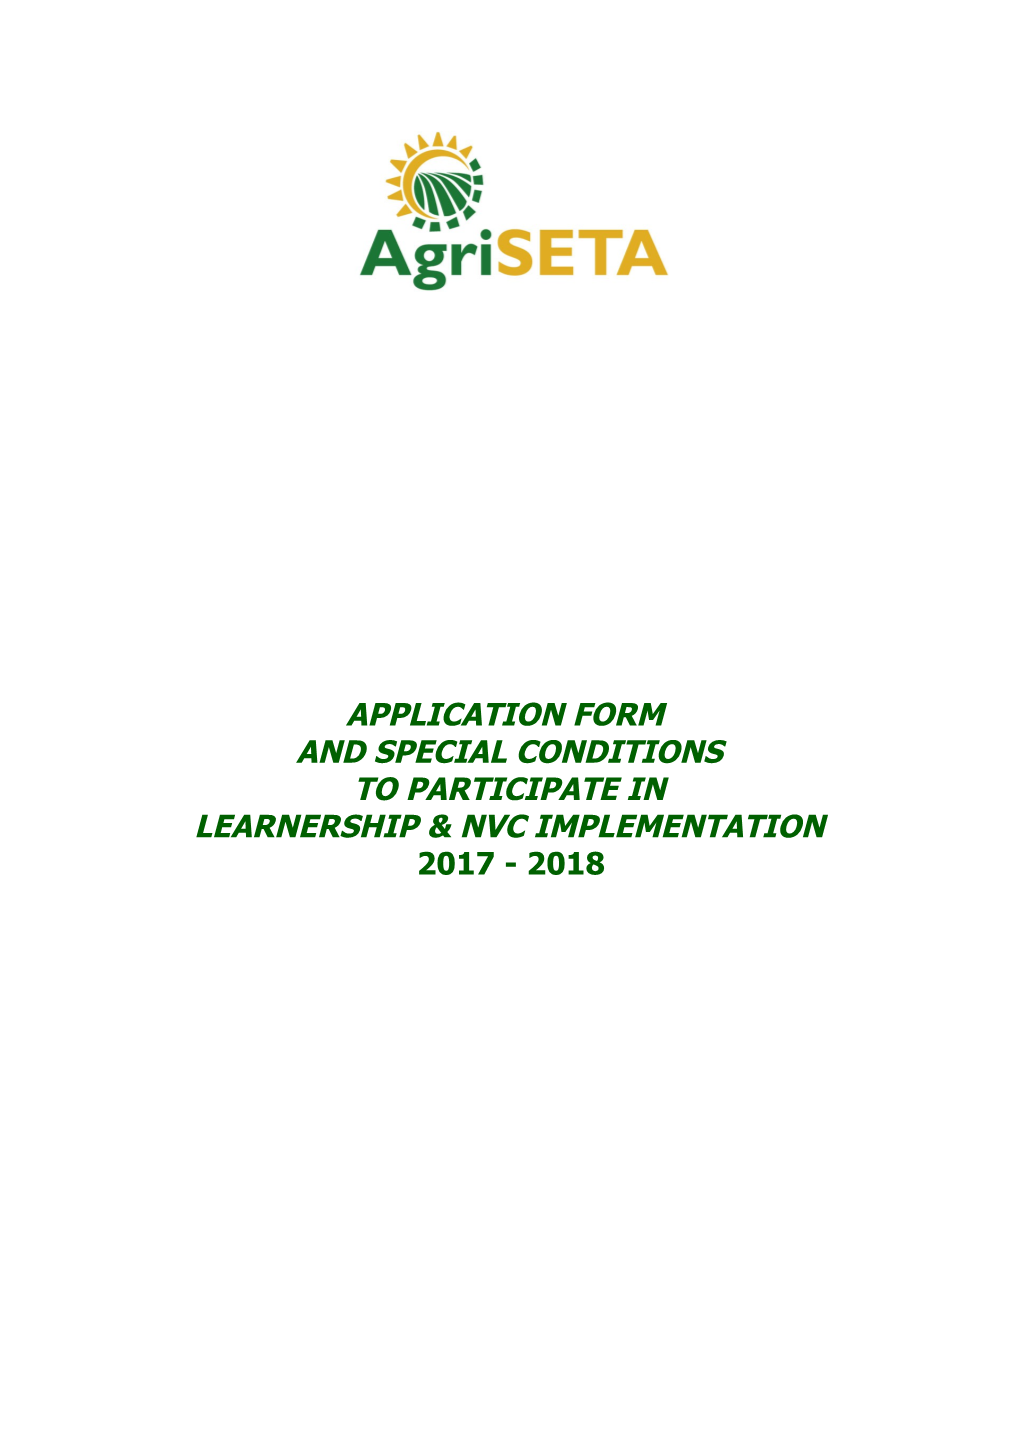 Record Joint Implementation Plan Between Agriseta and ______ s1